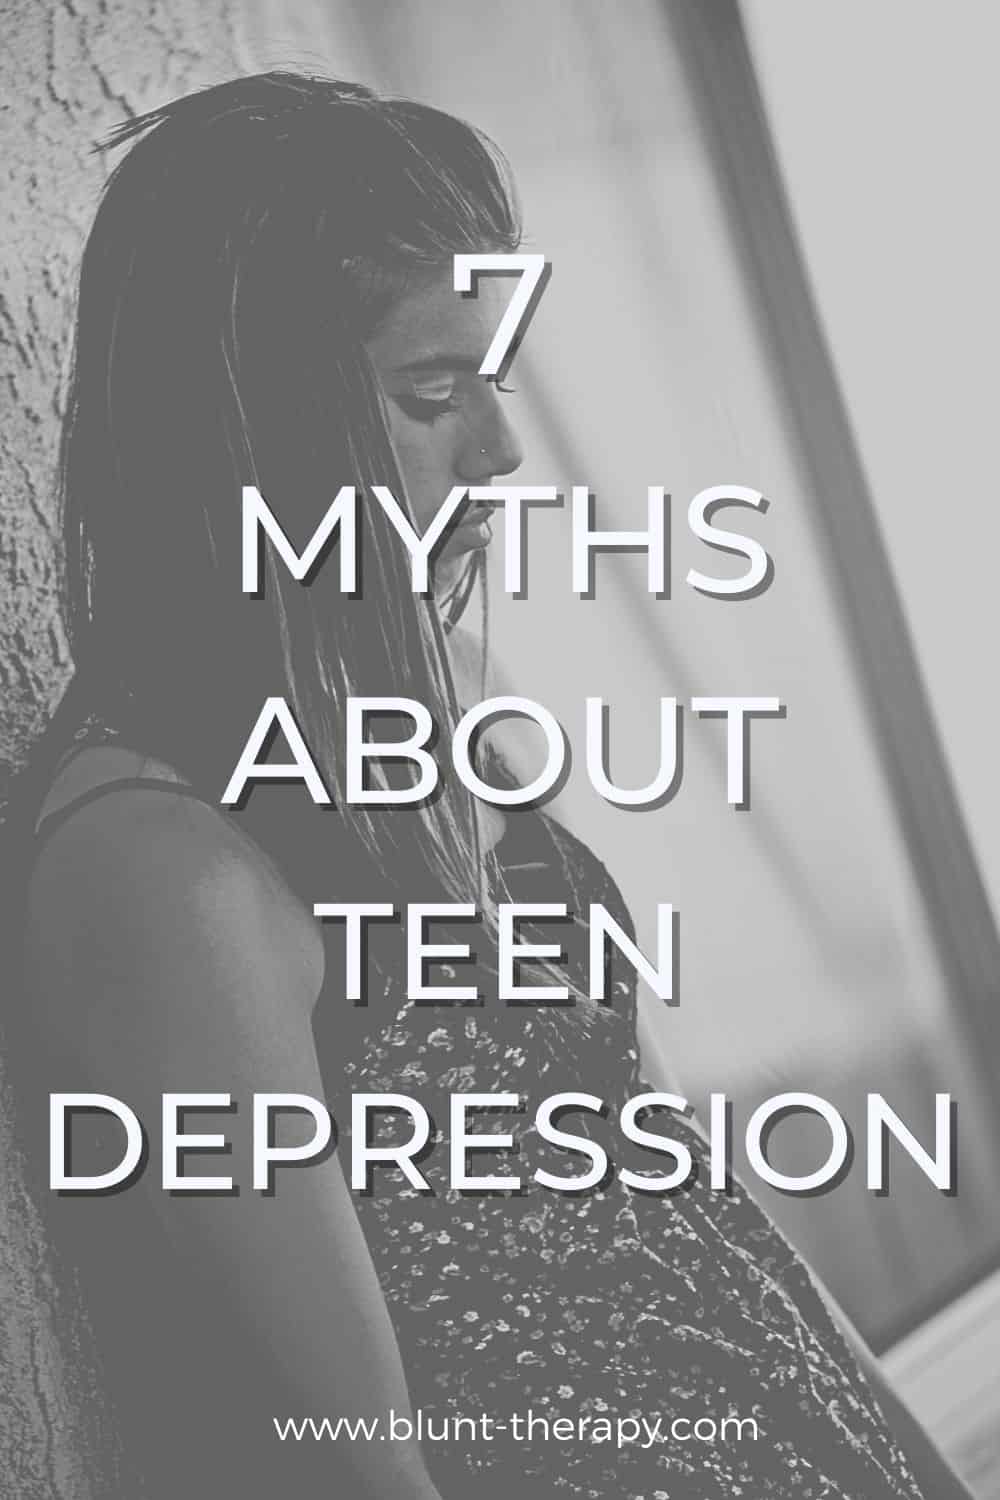 7 Myths About Teen Depression